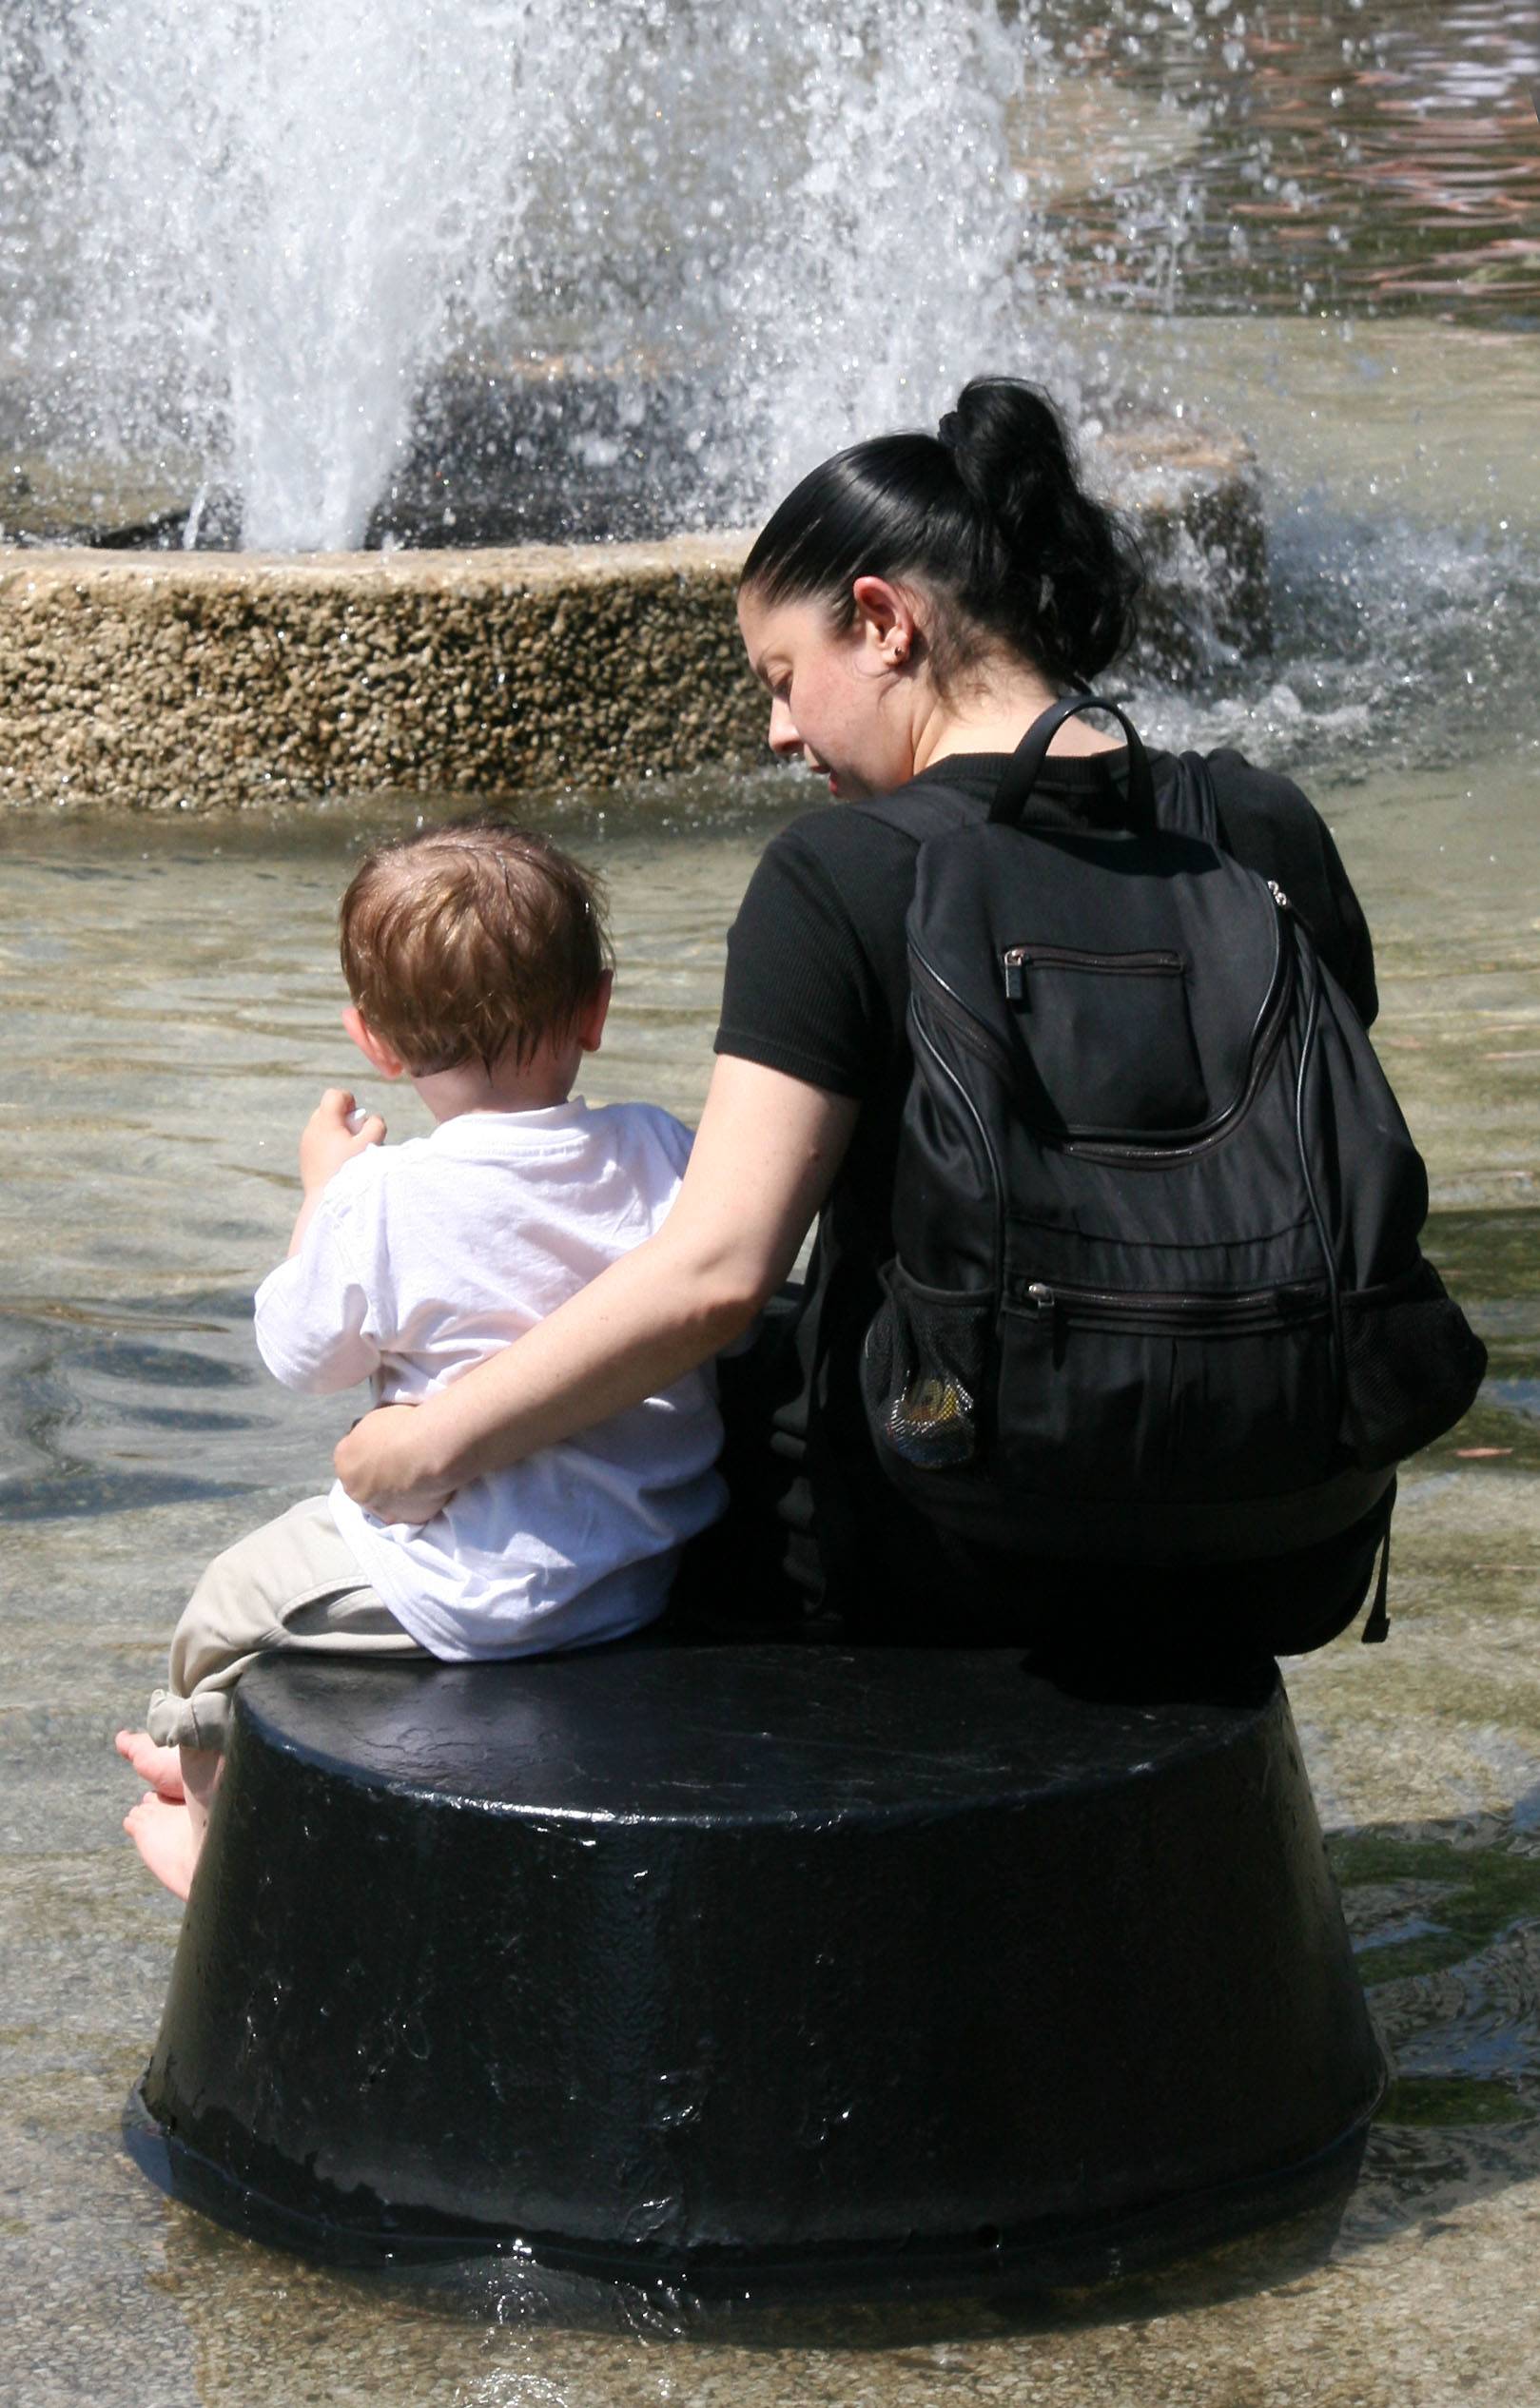 Mother & Child in the Pool at the Fountain